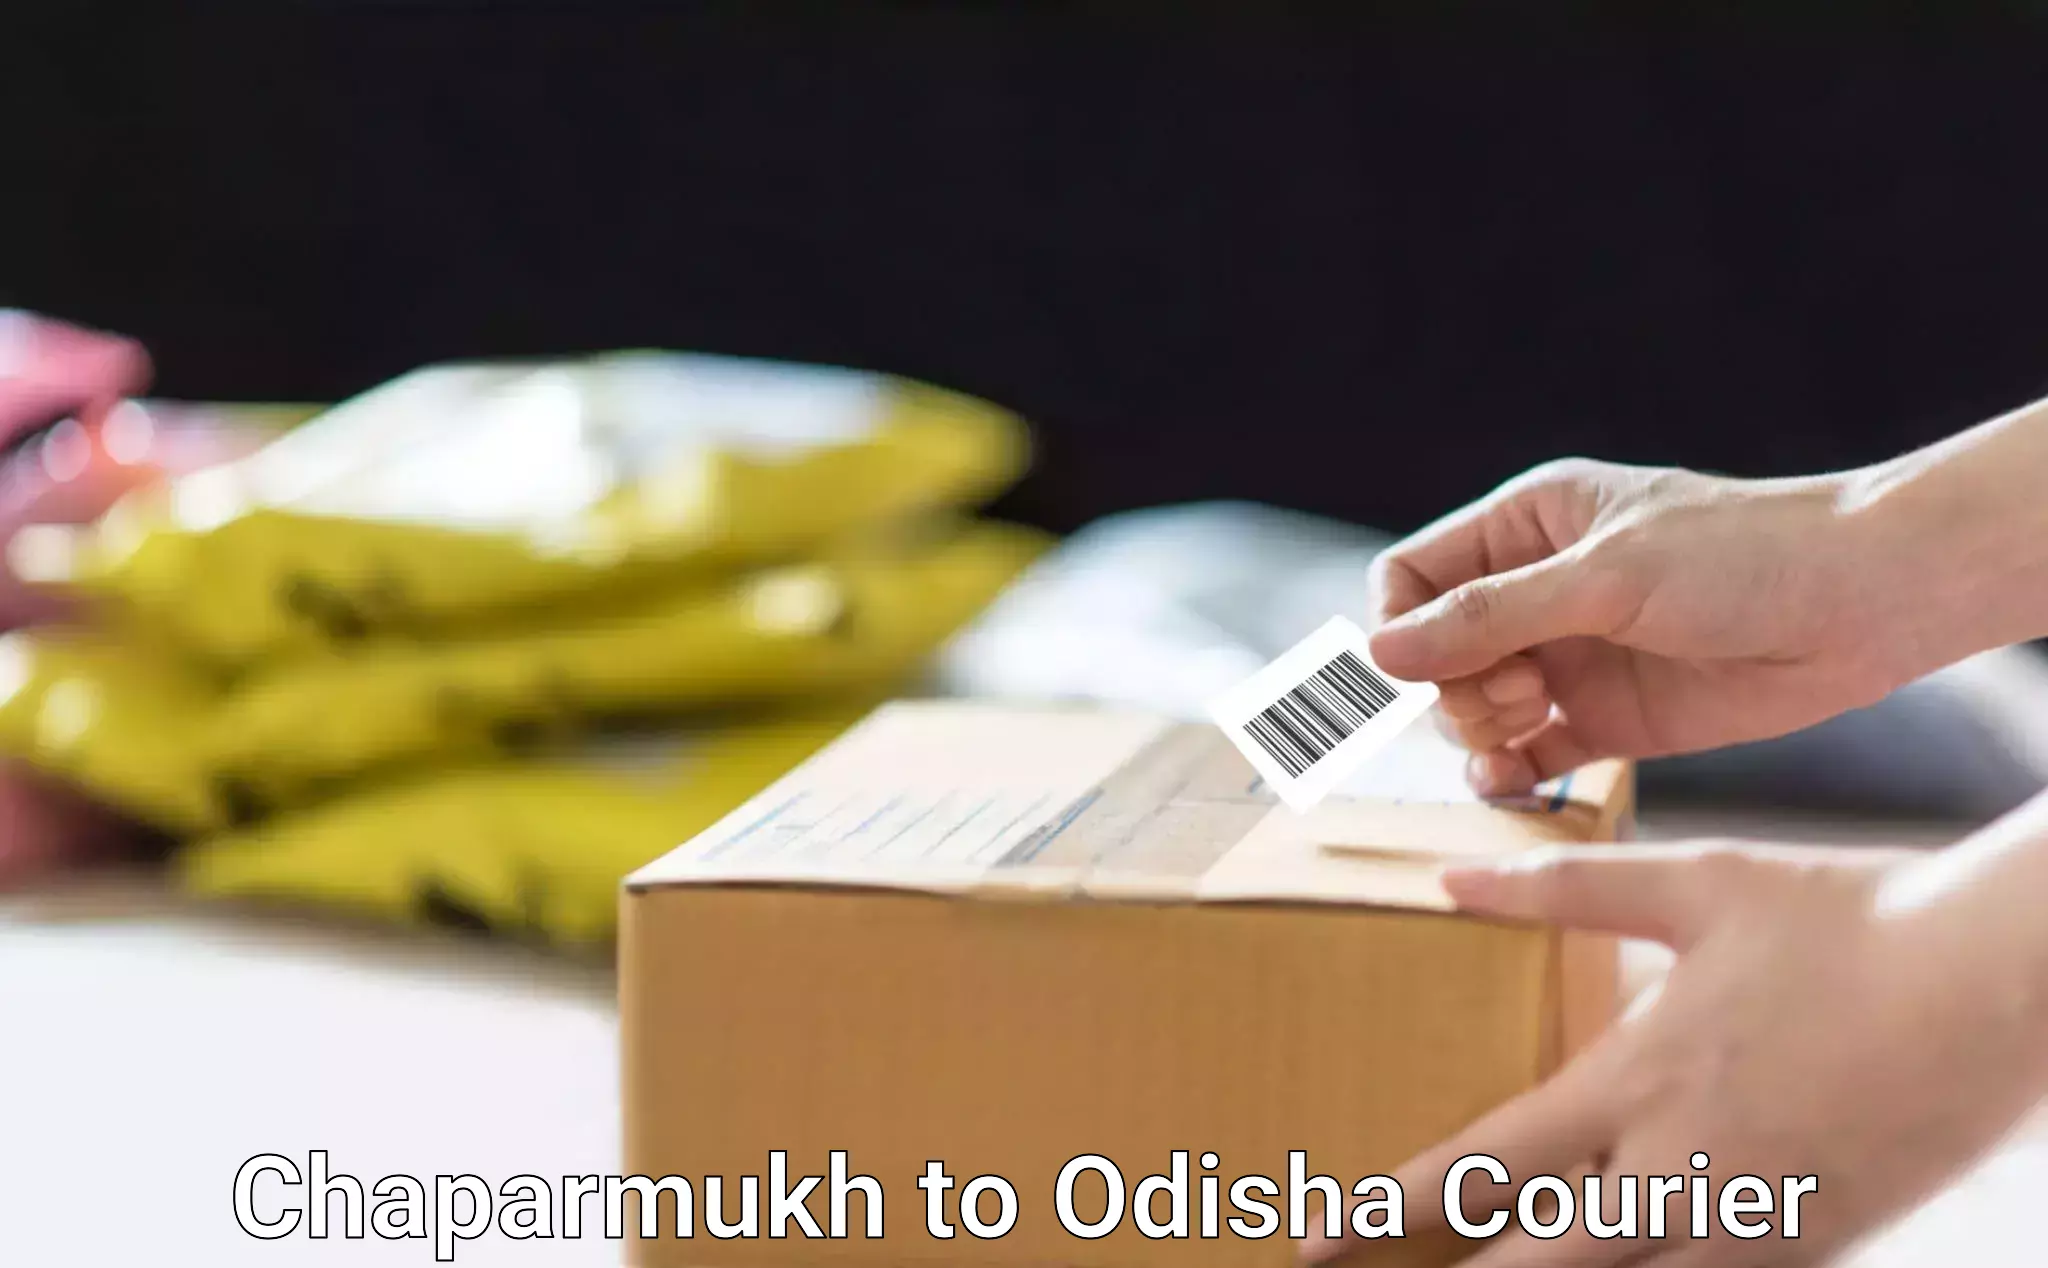 Professional courier handling Chaparmukh to Chatrapur